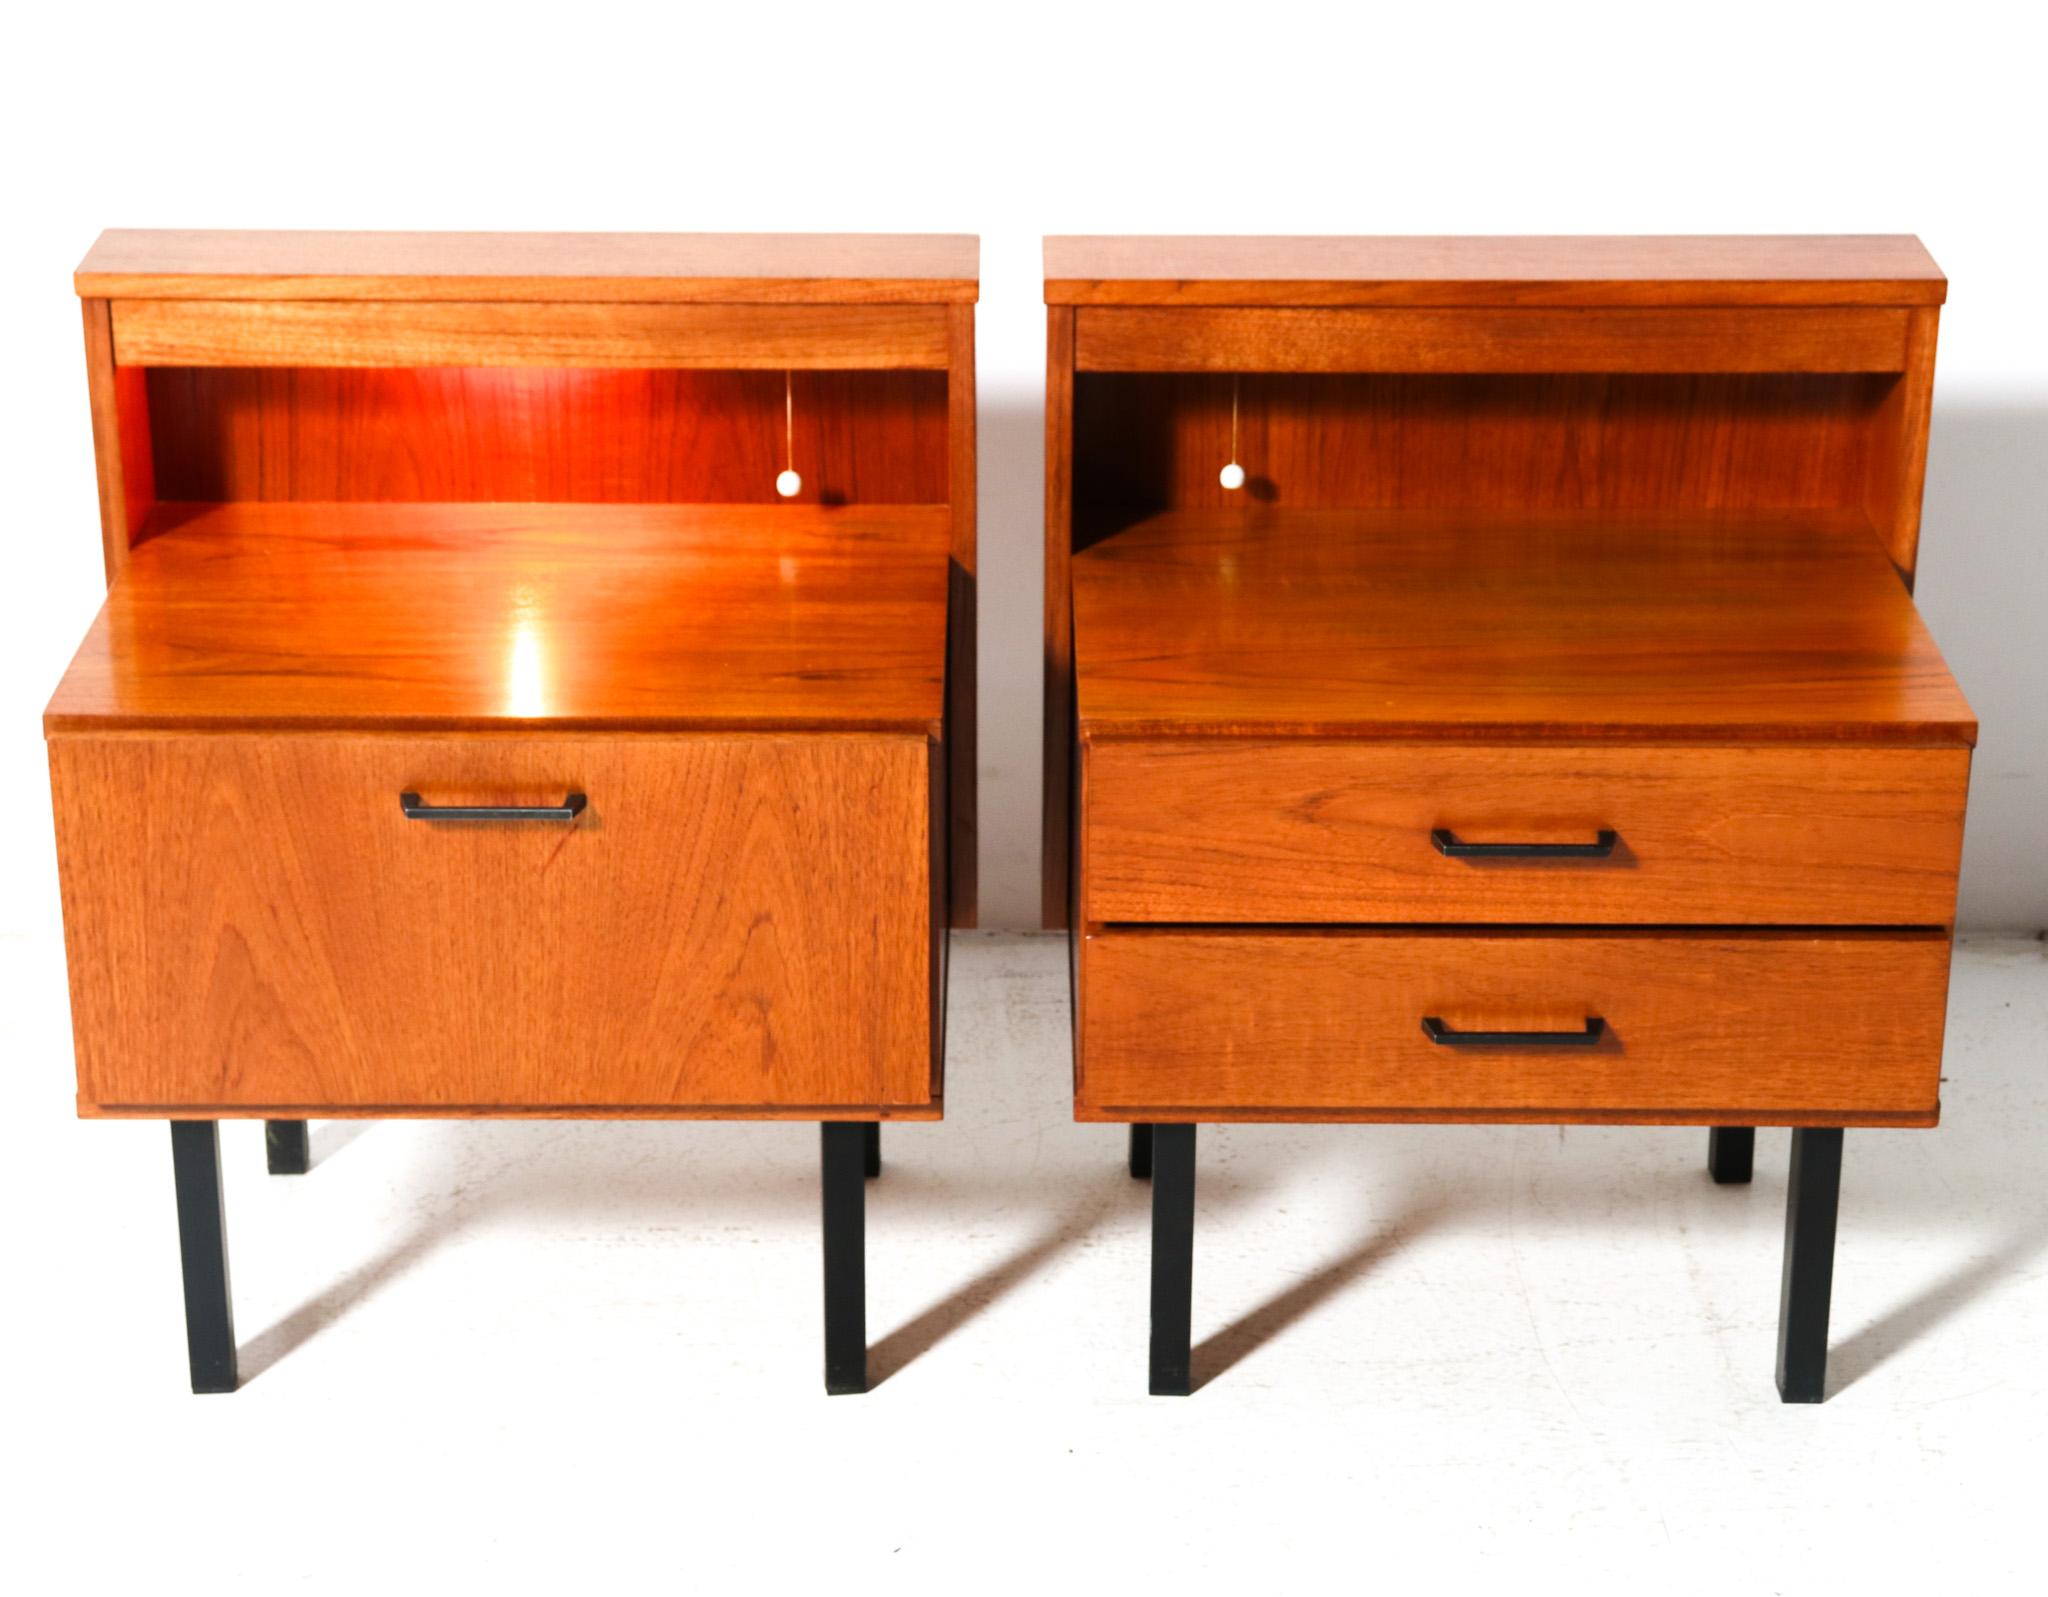 Mid-20th Century Teak Mid-Century Modern Nightstands or Bedside Tables, 1960s